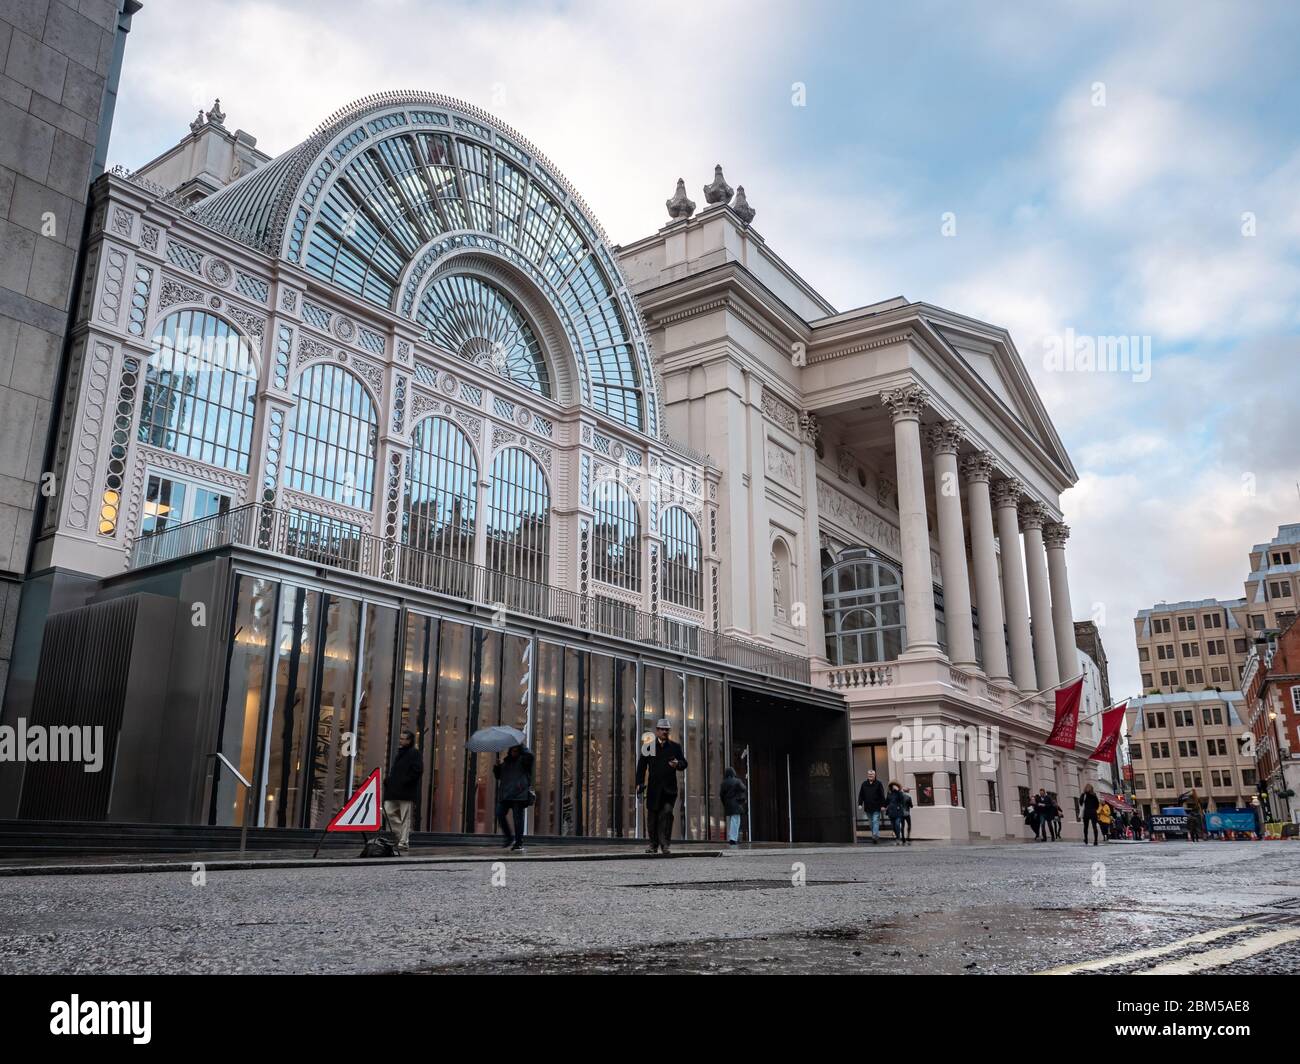 Royal Opera House, Covent Garden, with it's adjacent glass and iron Floral Hall renamed The Paul Hamlyn Hall in the West End of London, UK. Stock Photo